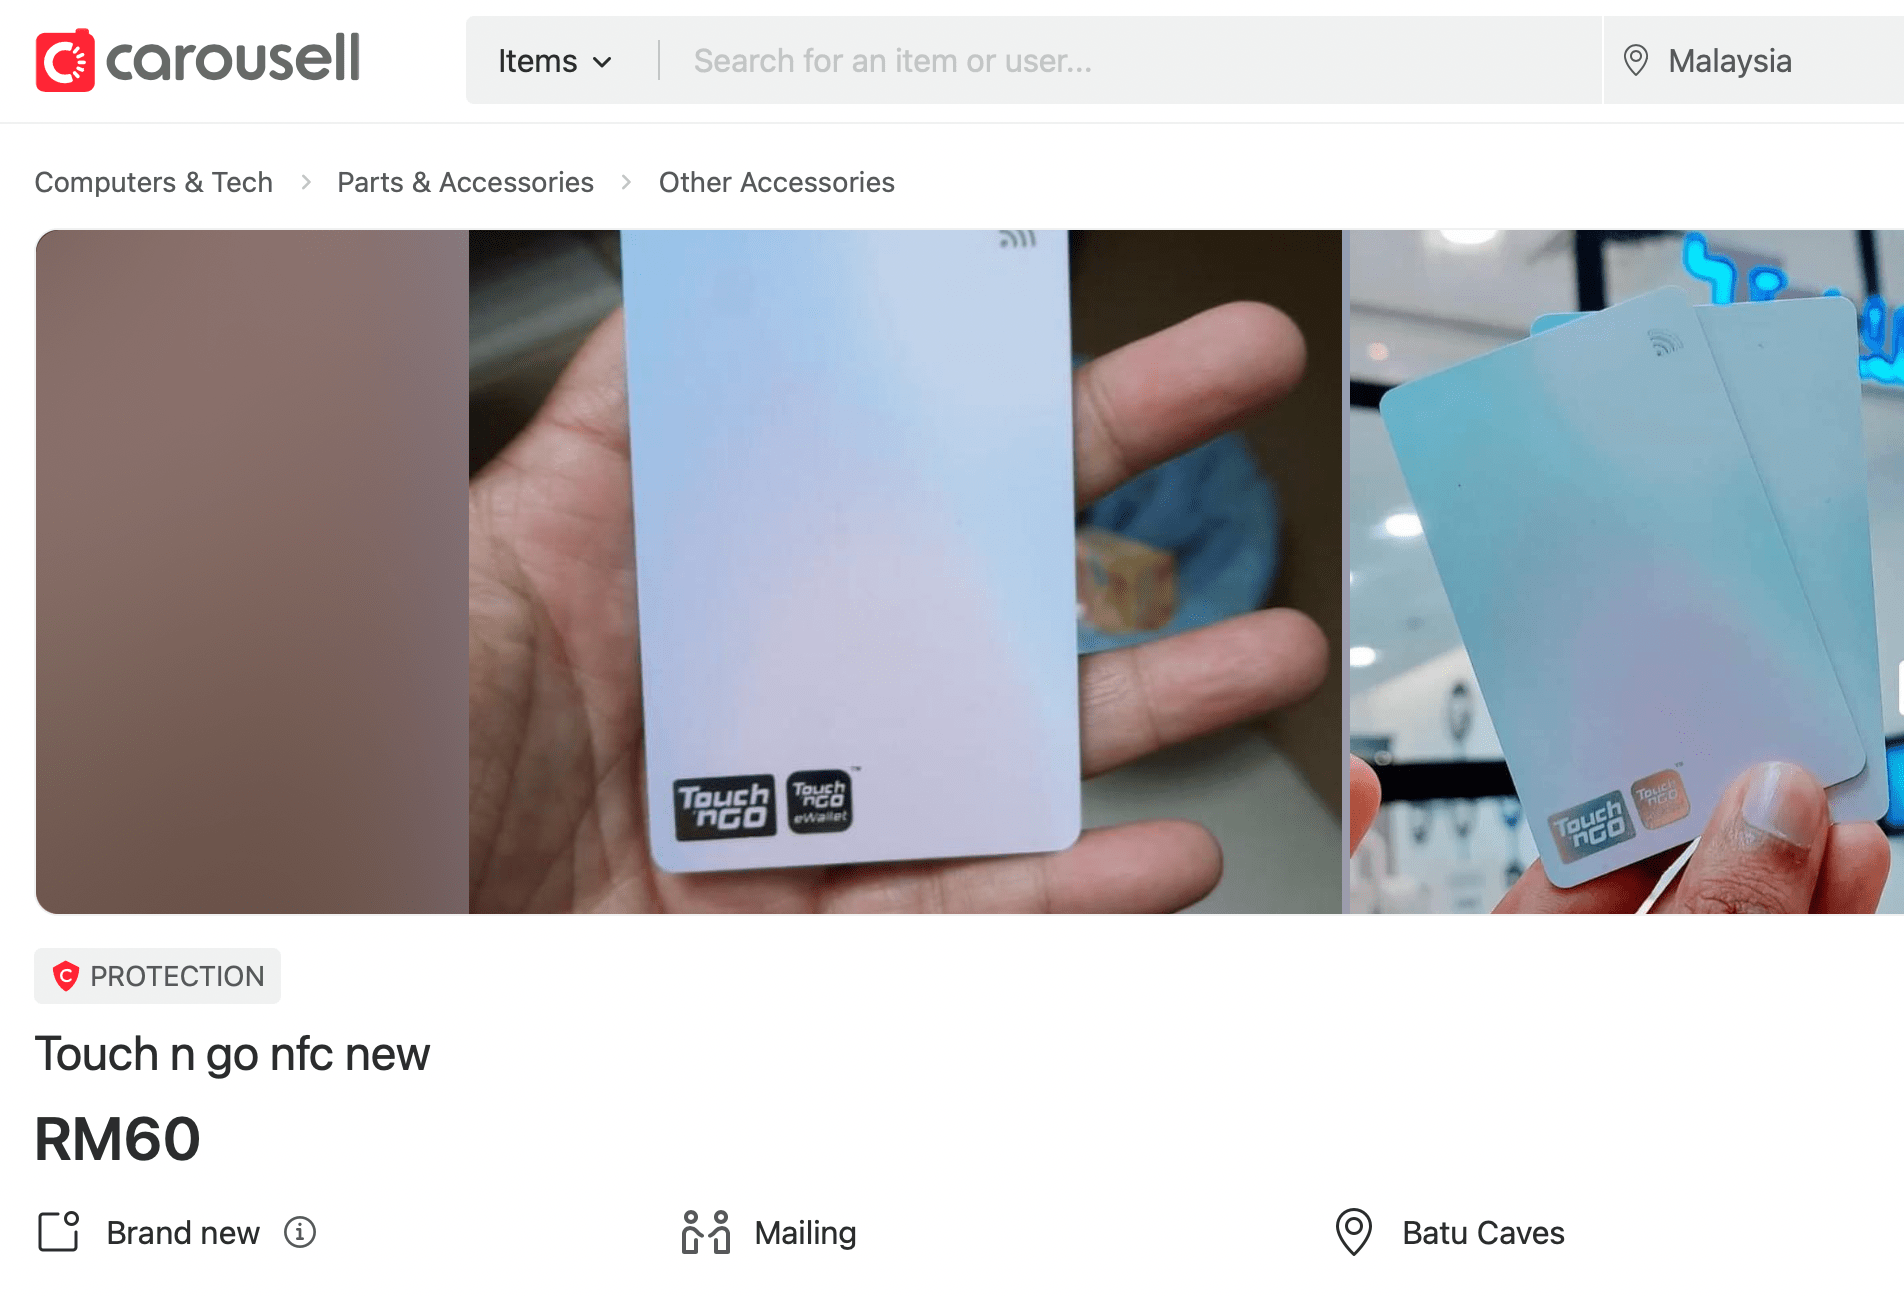 Enhanced touch 'n go card resold on shopee & carousell for rm65, 6 times higher than original price 01